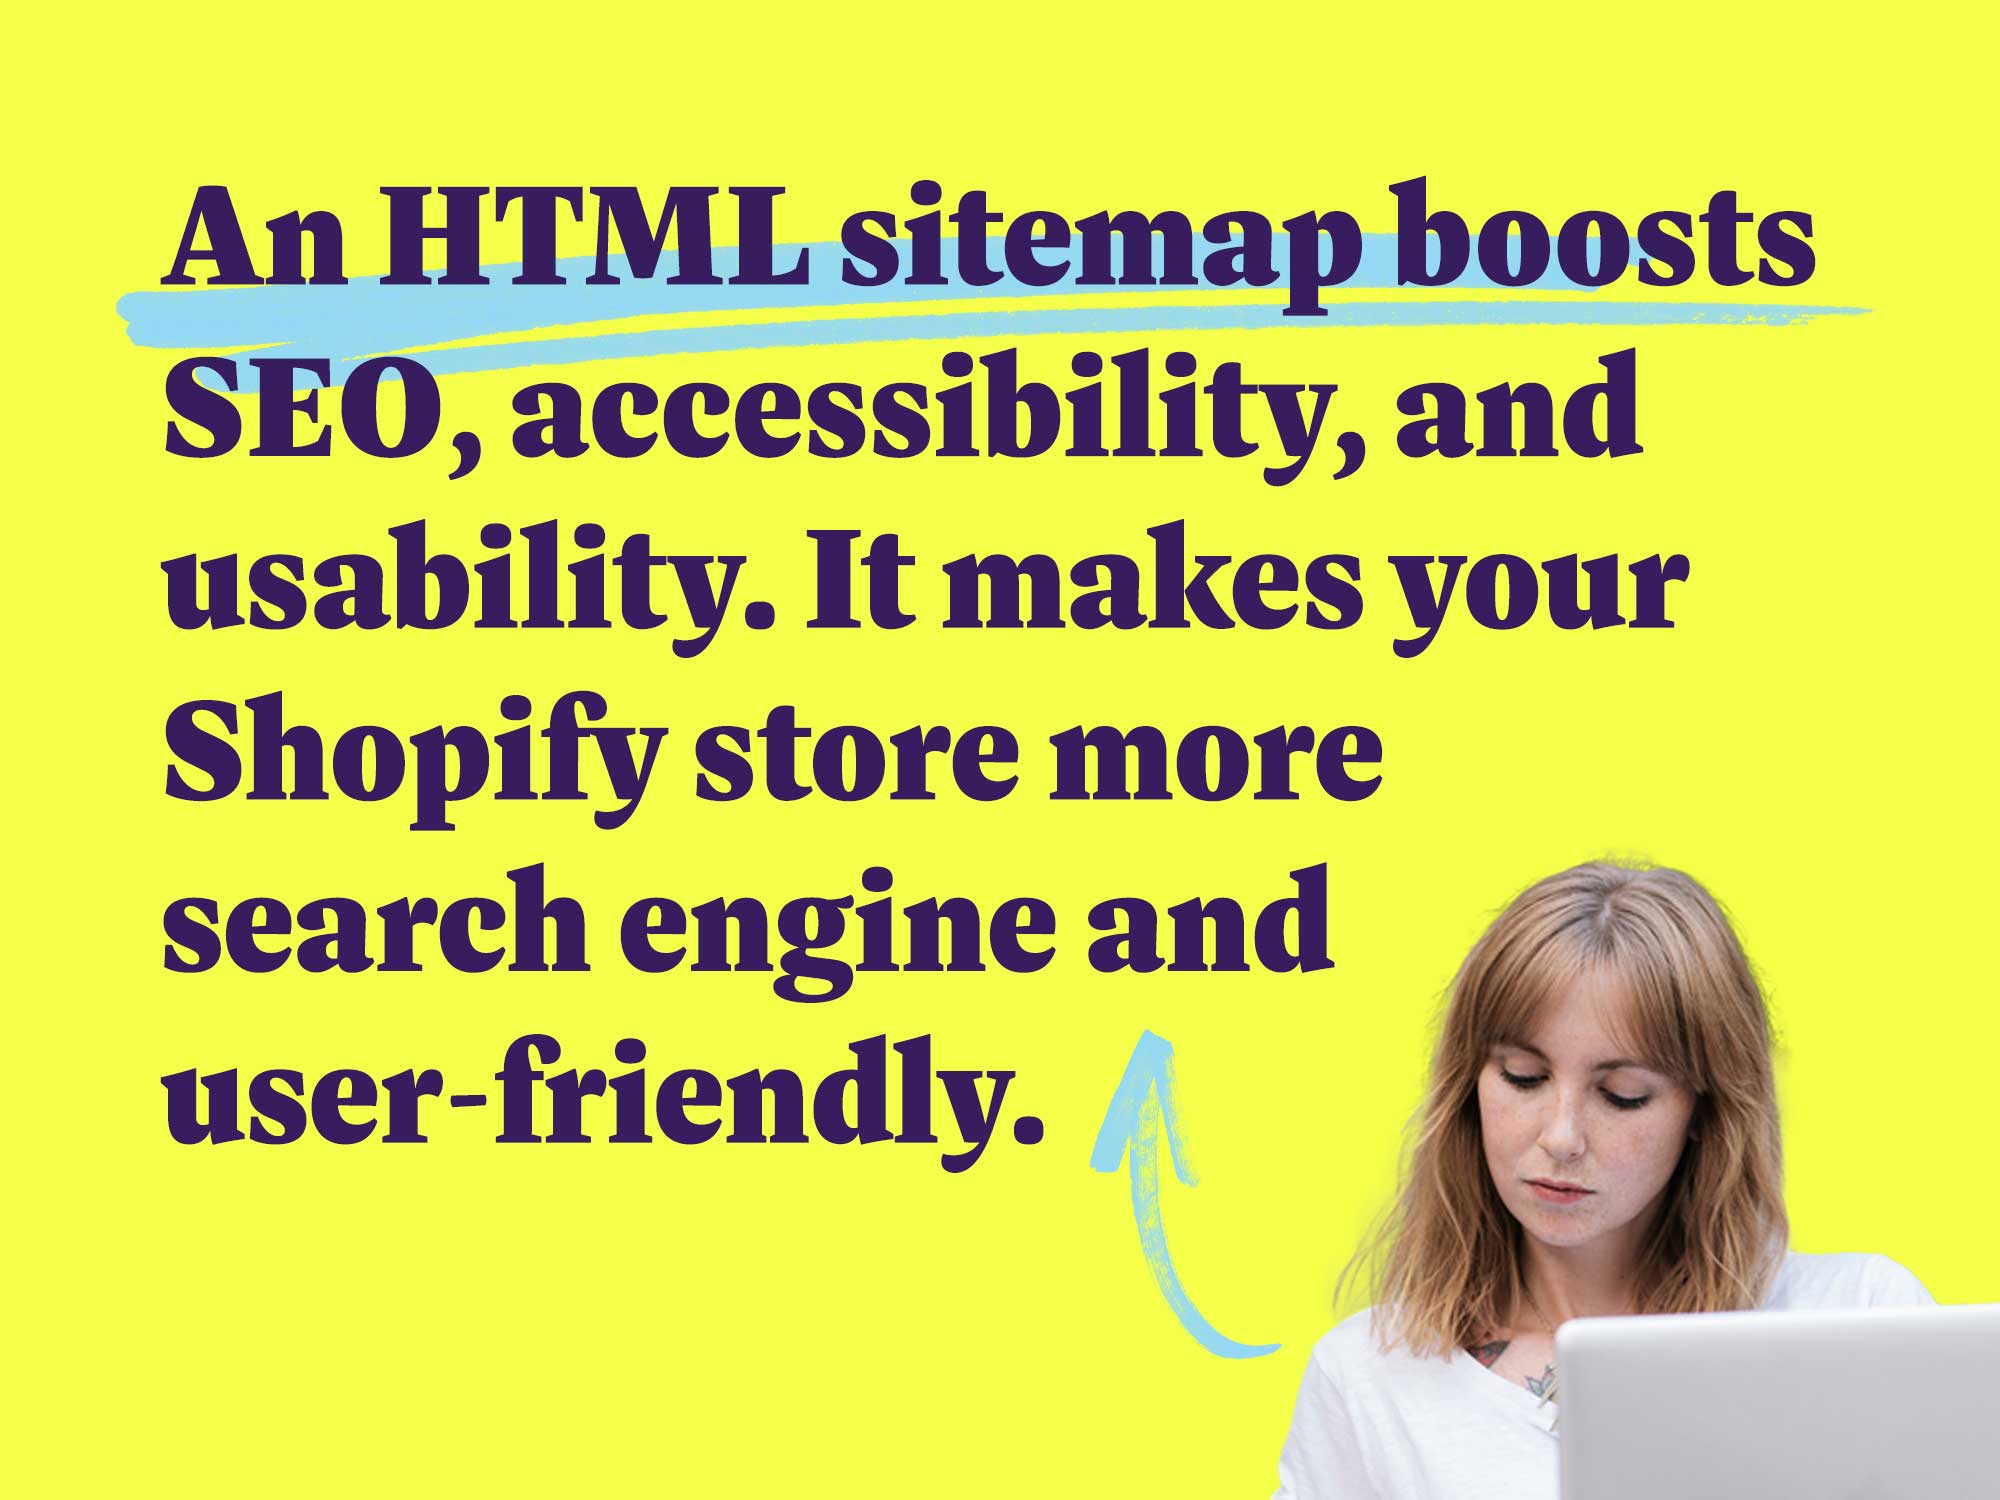 An HTML sitemap boosts SEO, accessibility, and usability. It makes your Shopify store more search engine and user-friendly.